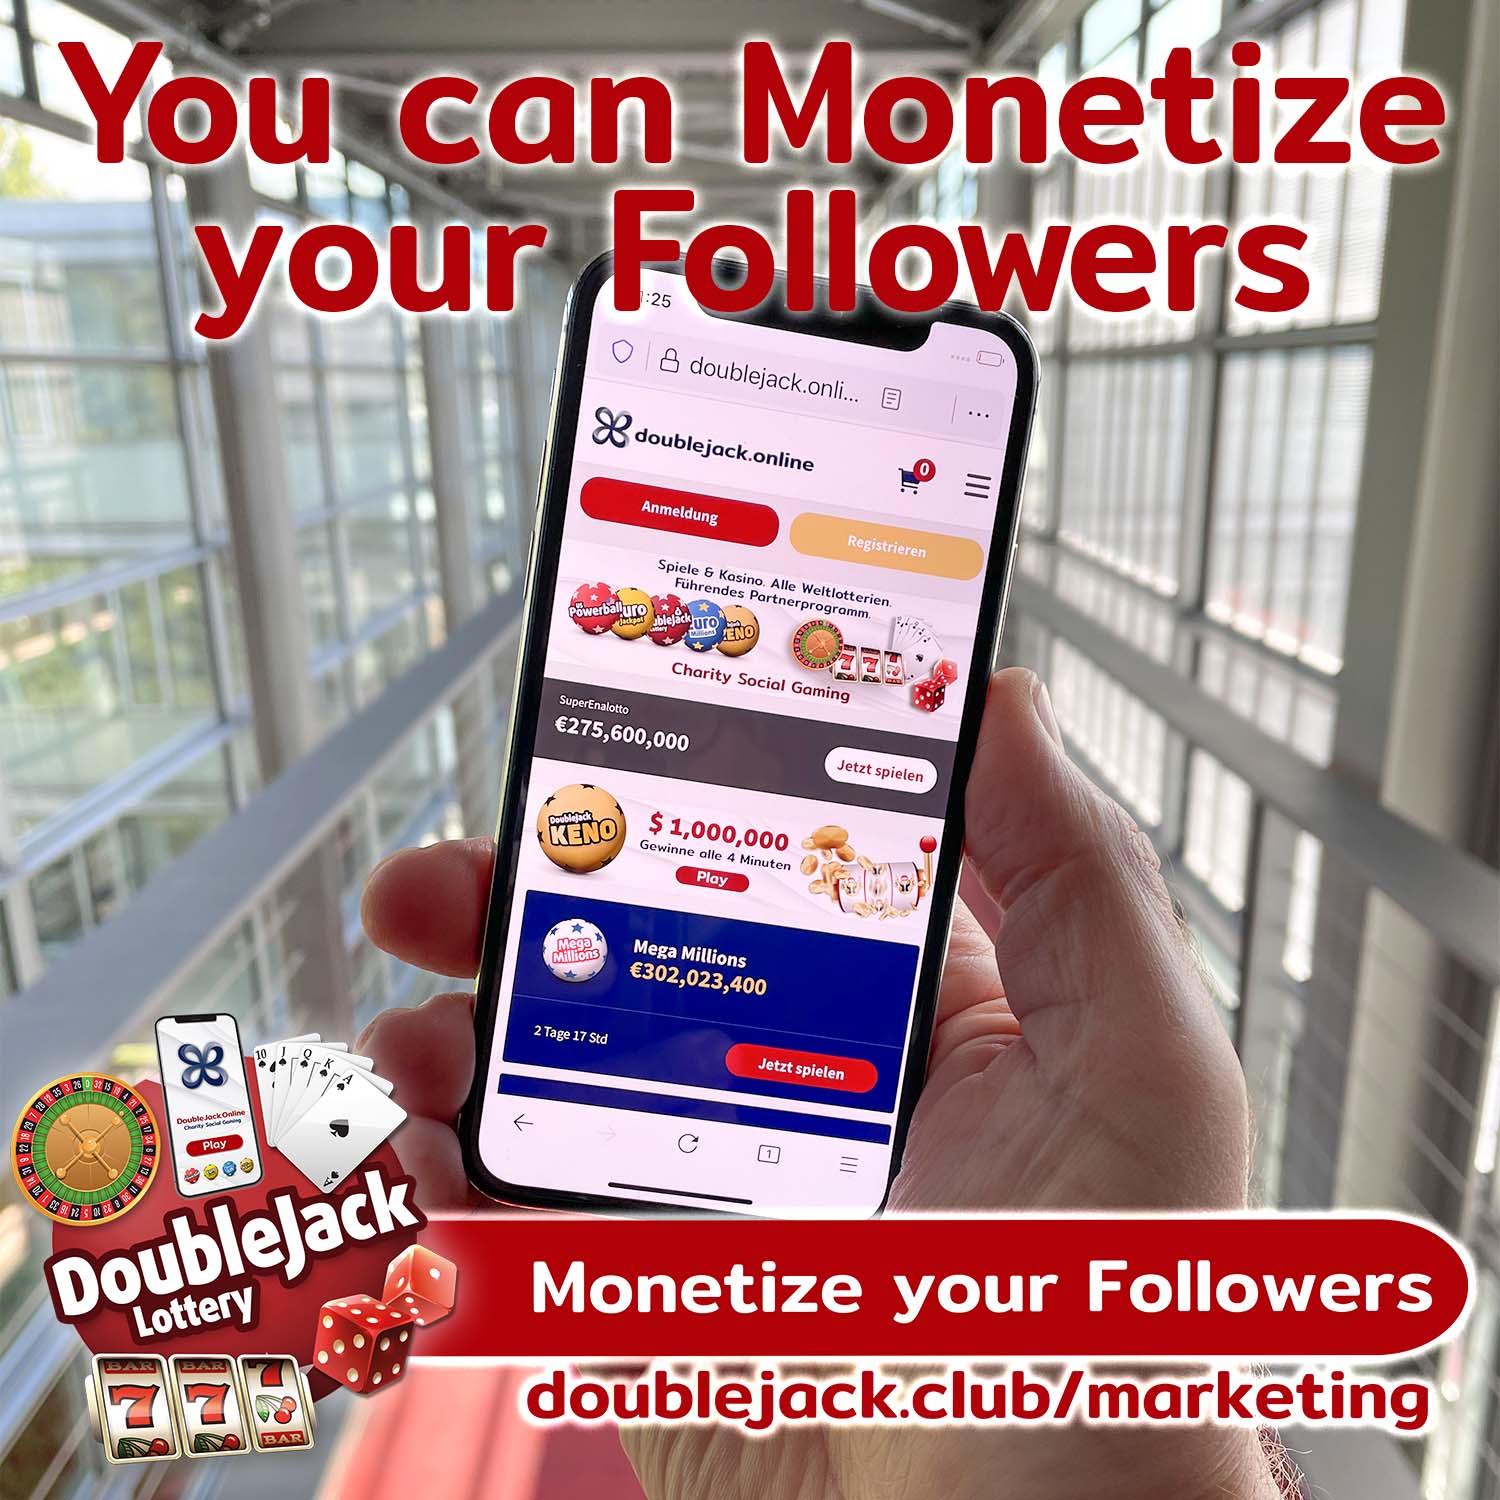 3 Ways You Can Monetize Your Followers with doublejack